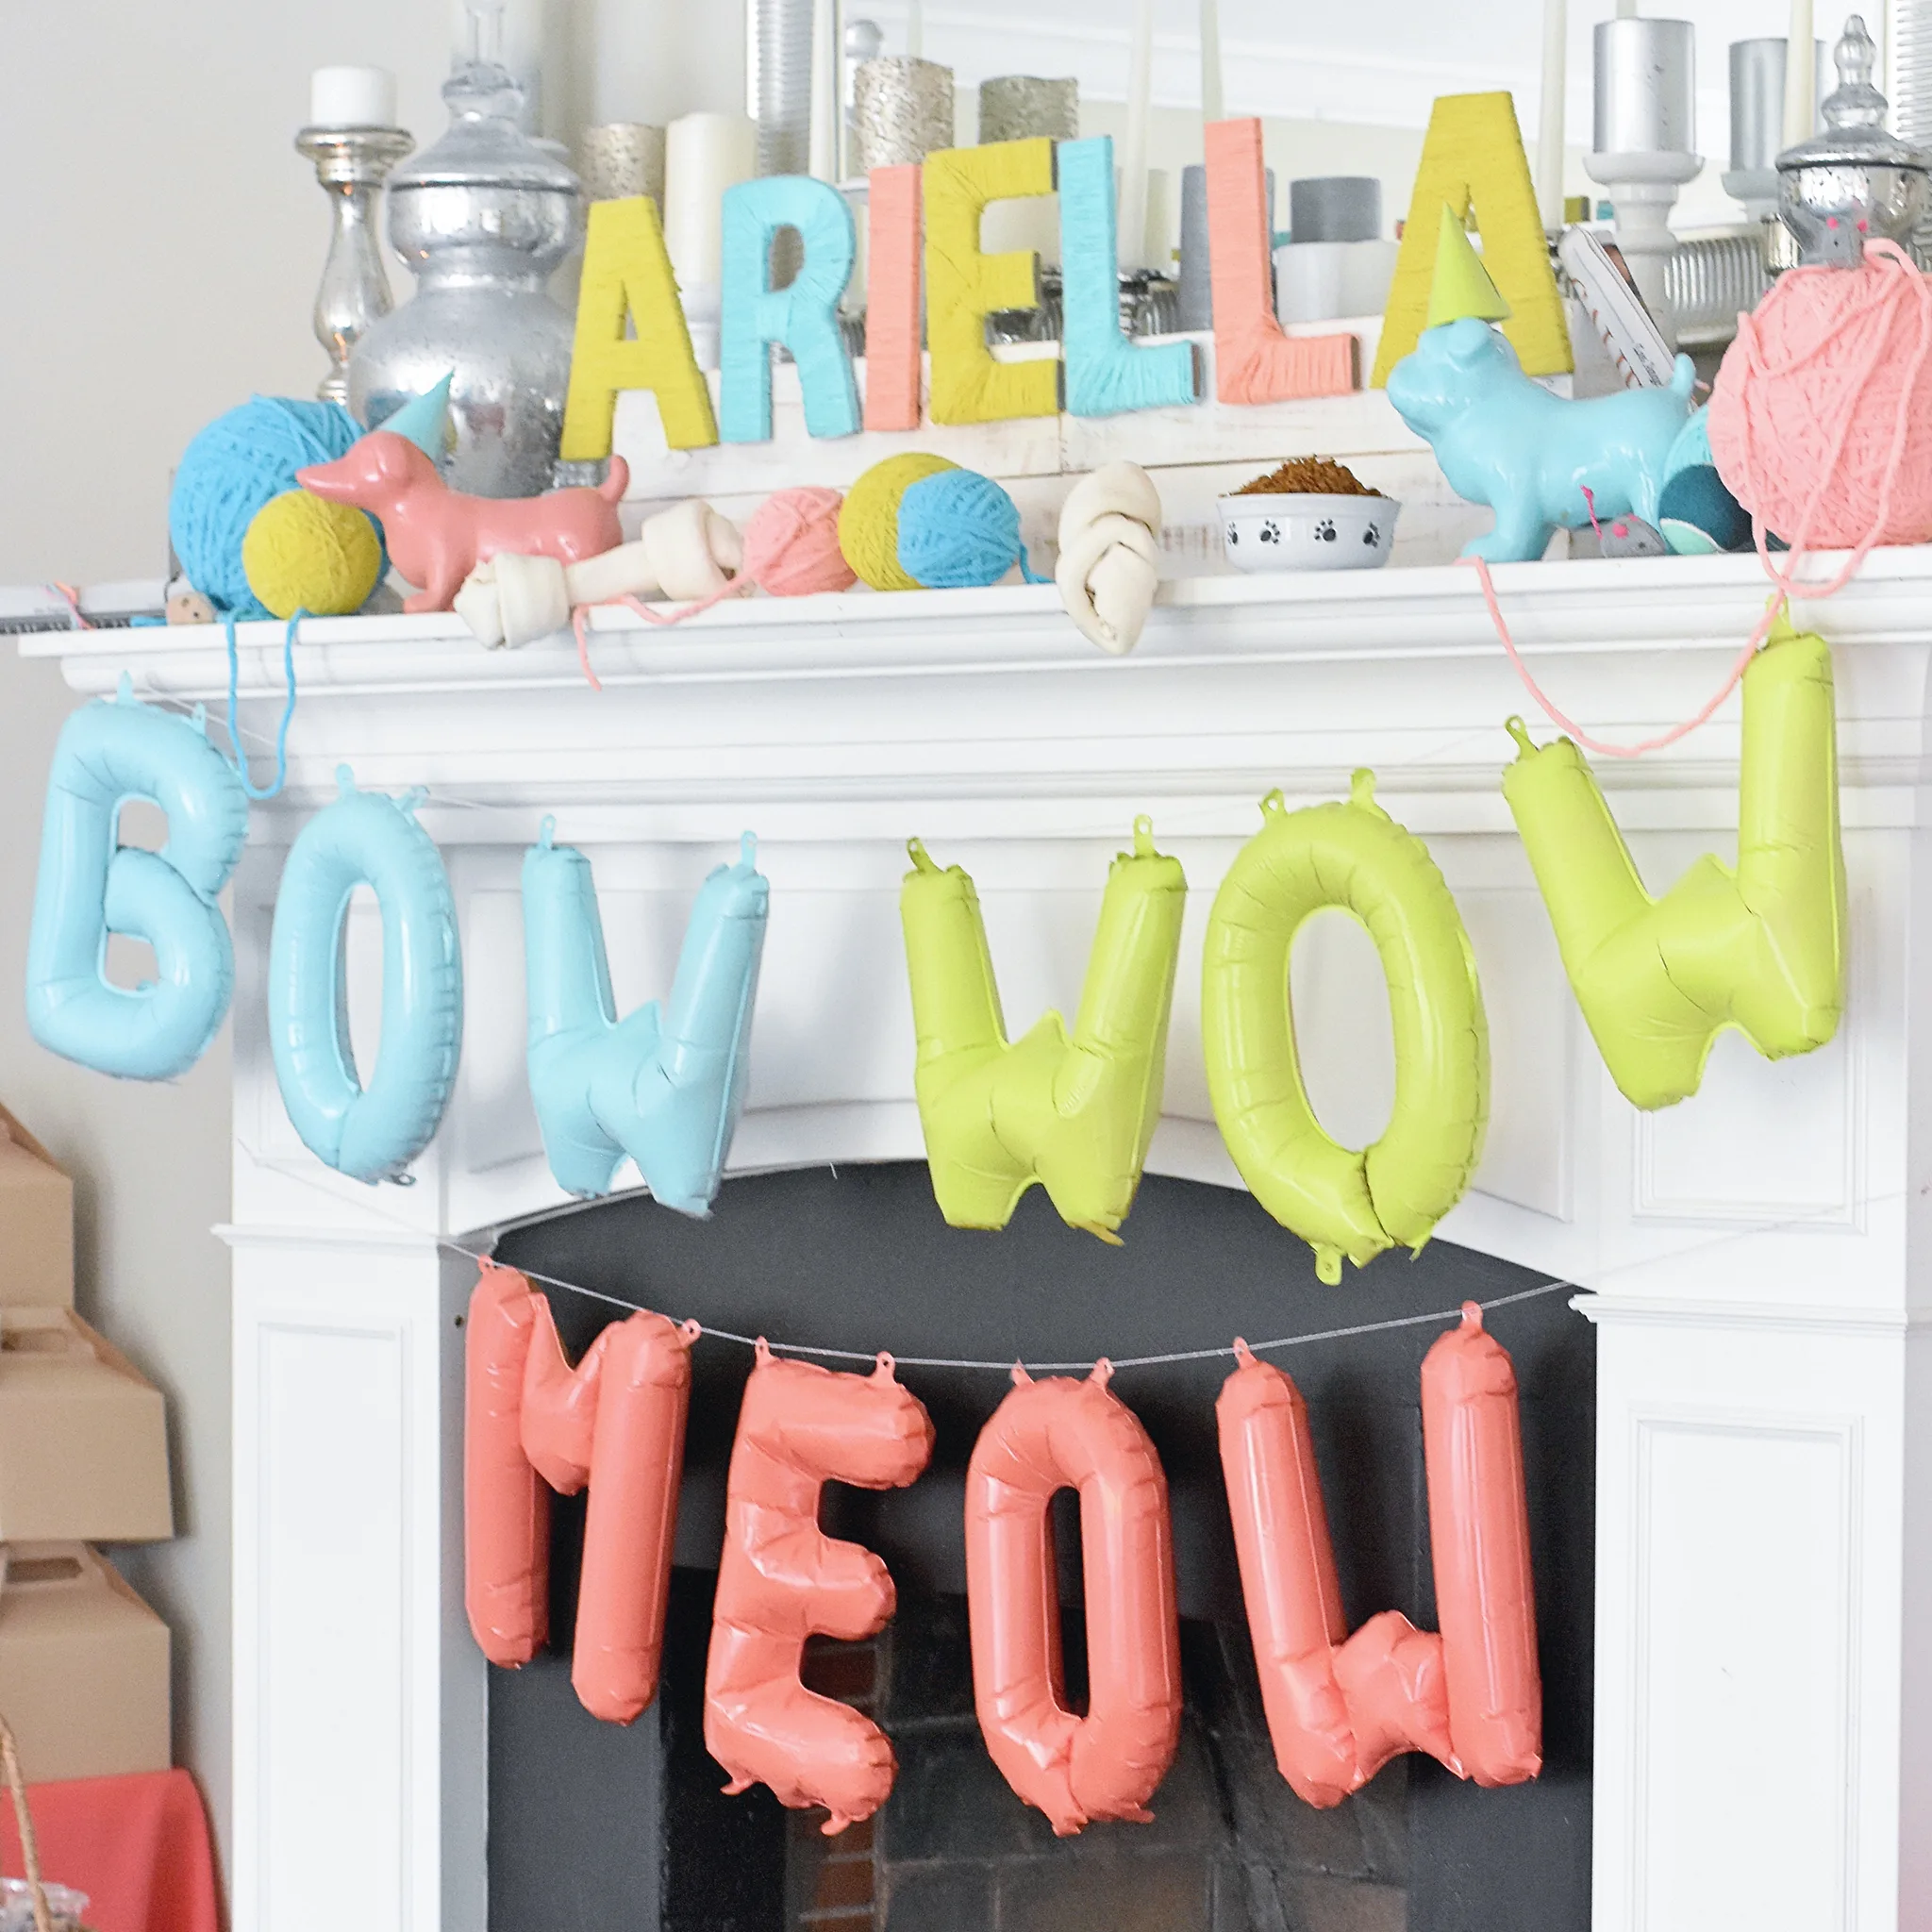 Yarn-wrapped letters and letter balloon decor!